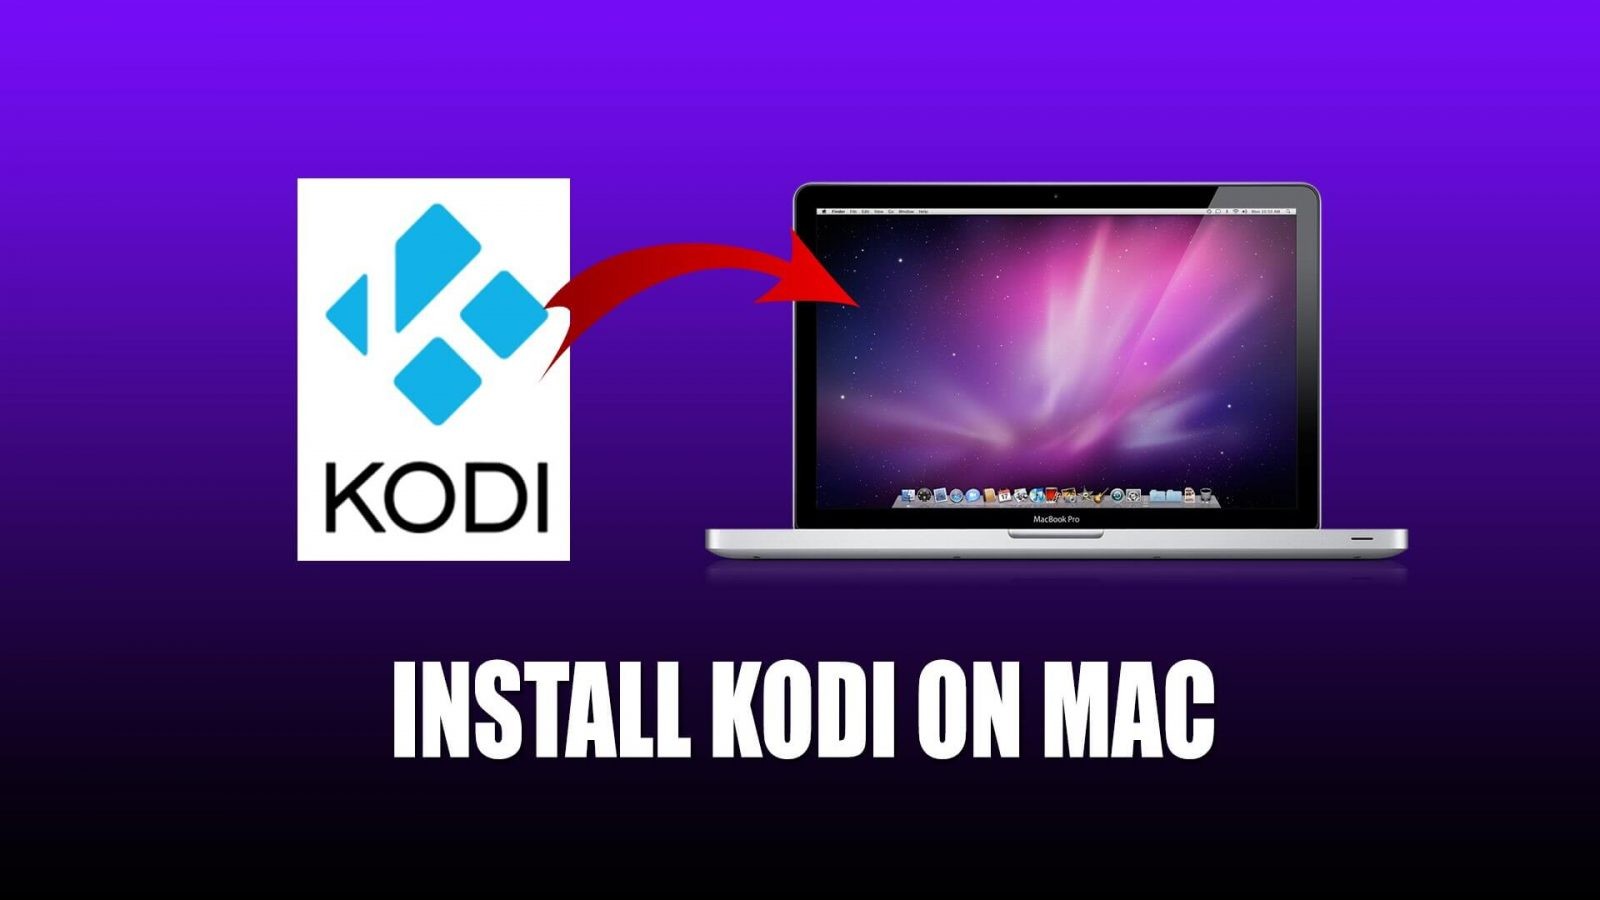 Download xbmc for macbook air keyboard cover